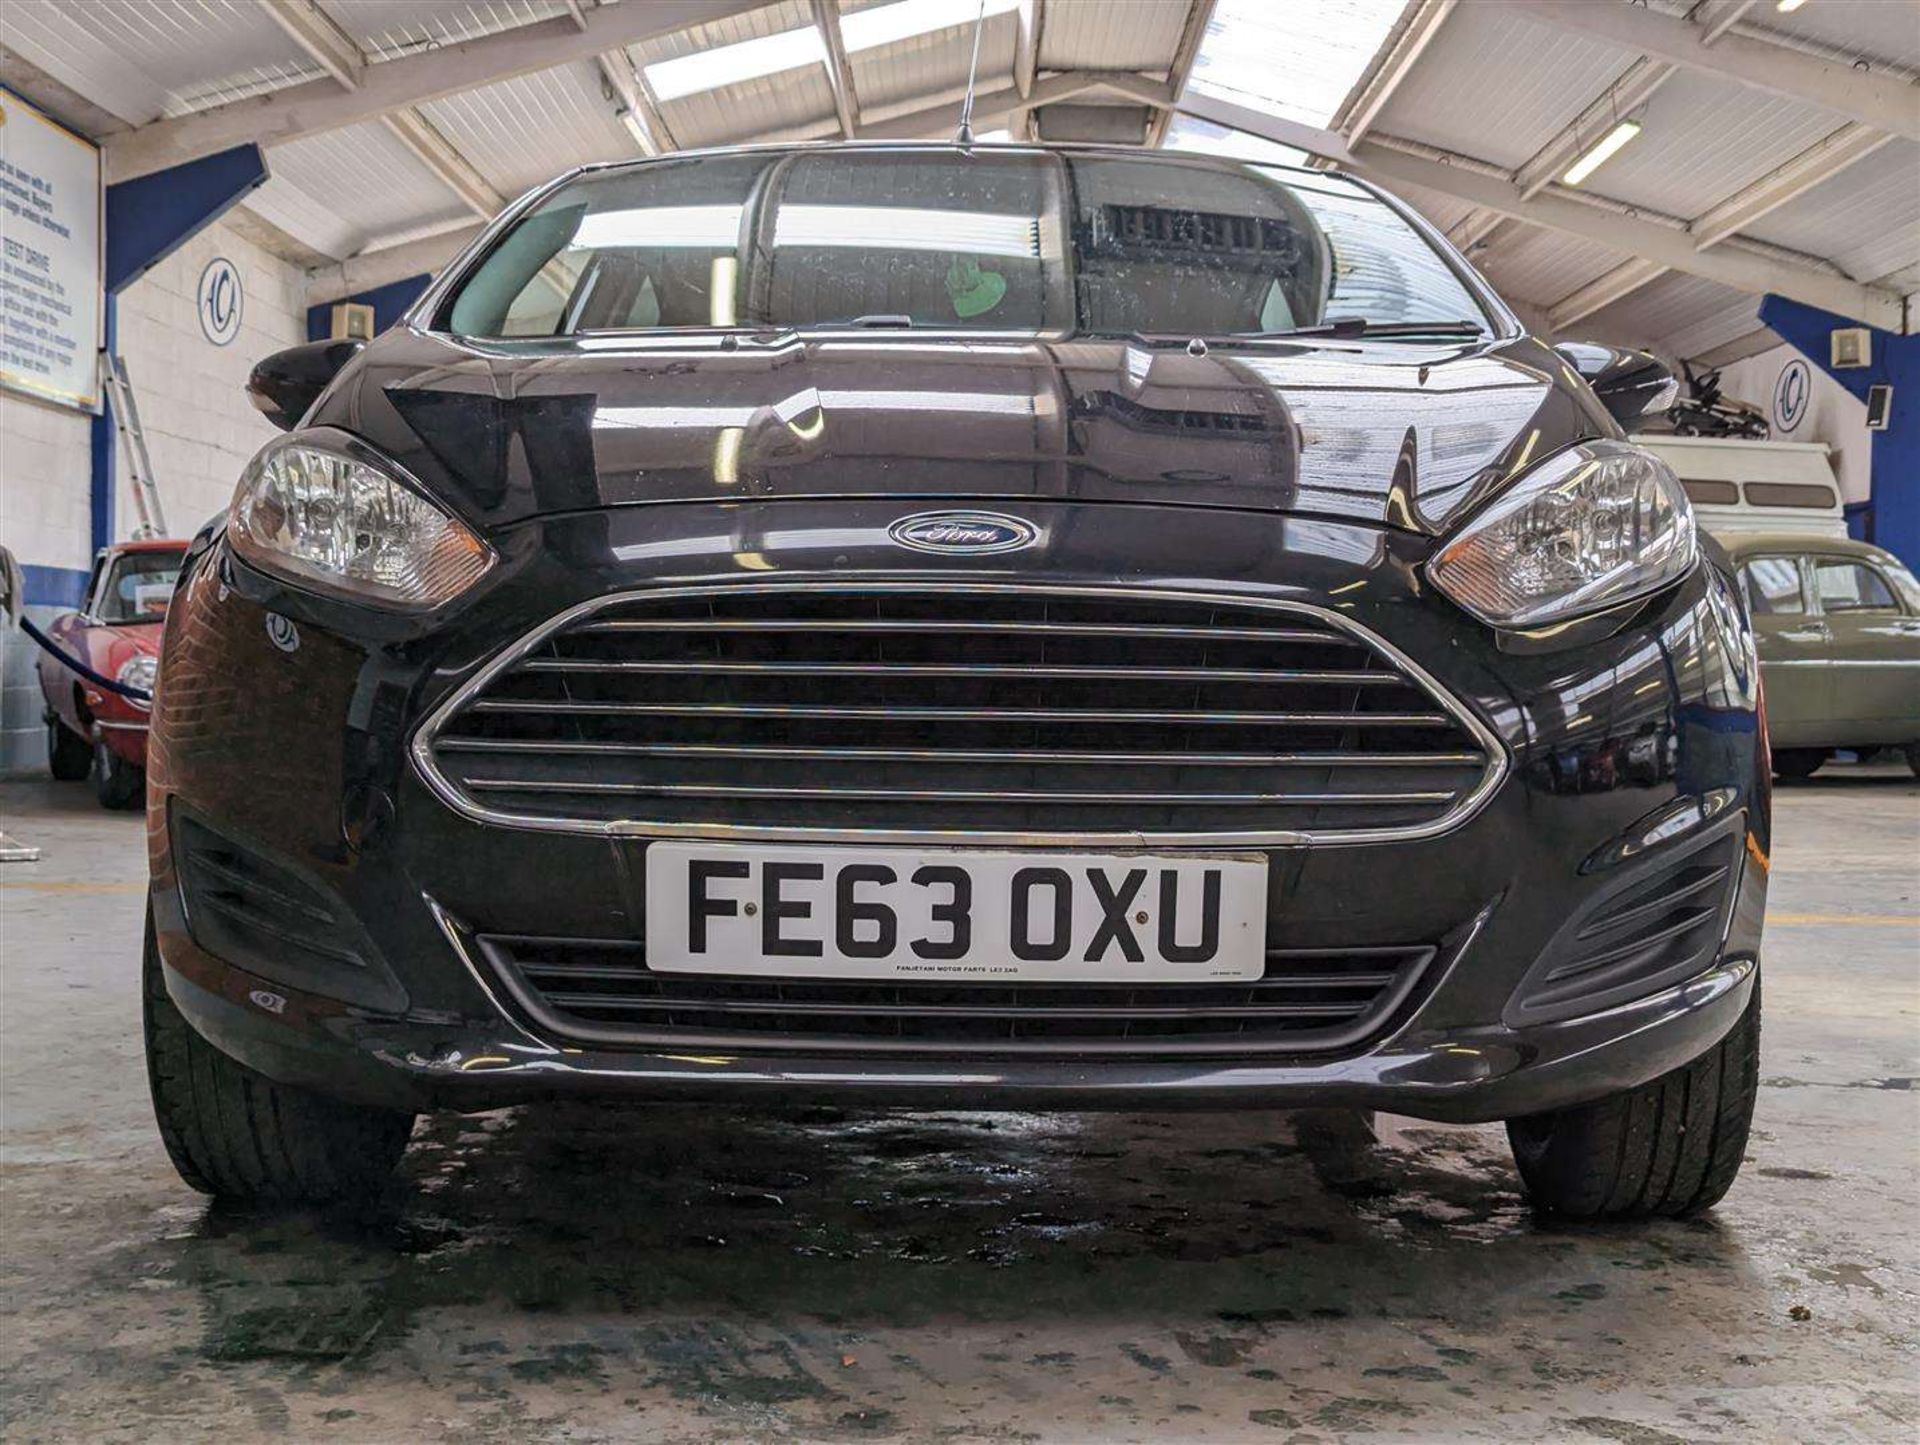 2013 FORD FIESTA STYLE TDCI - Image 17 of 29